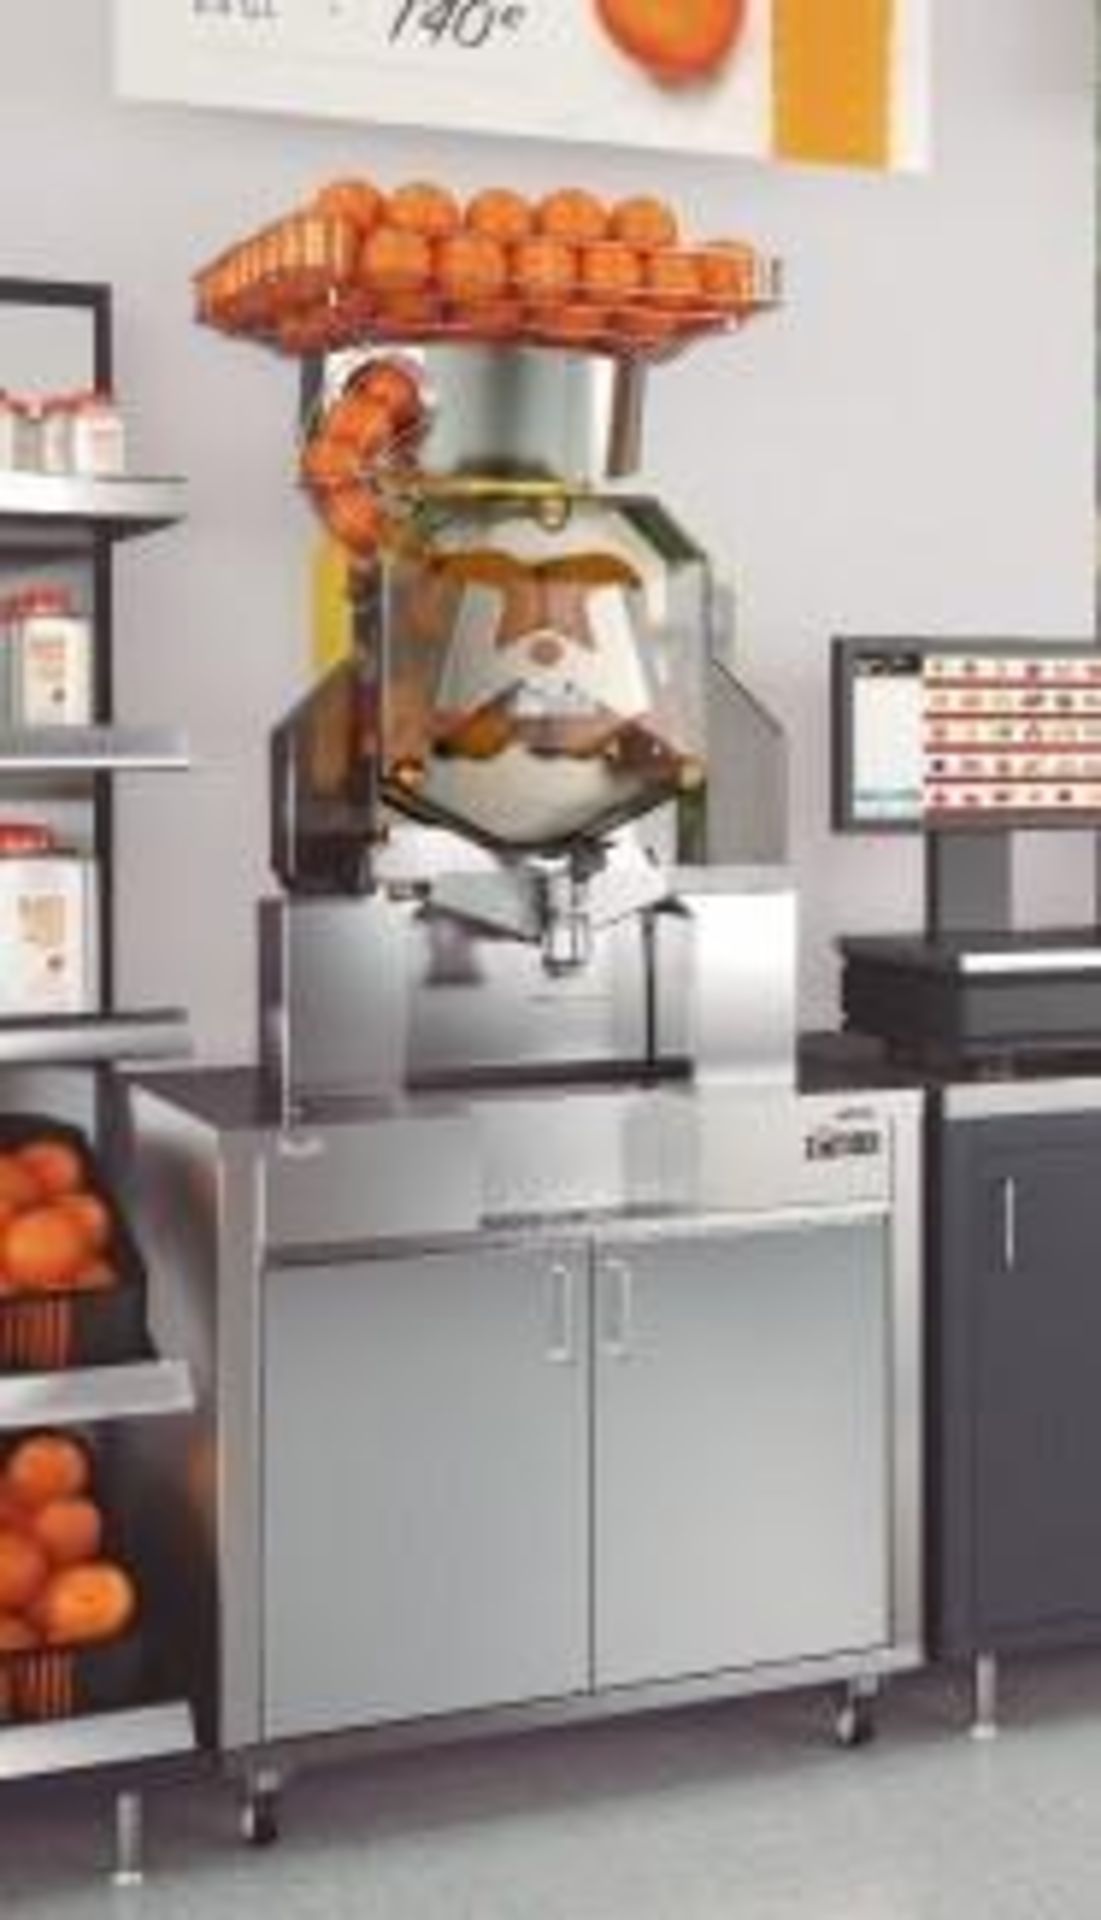 1 x Zumex Speed S +Plus Self-Service Podium Commercial Citrus Juicer - Manufactured in 2018 - Ideal - Image 12 of 21